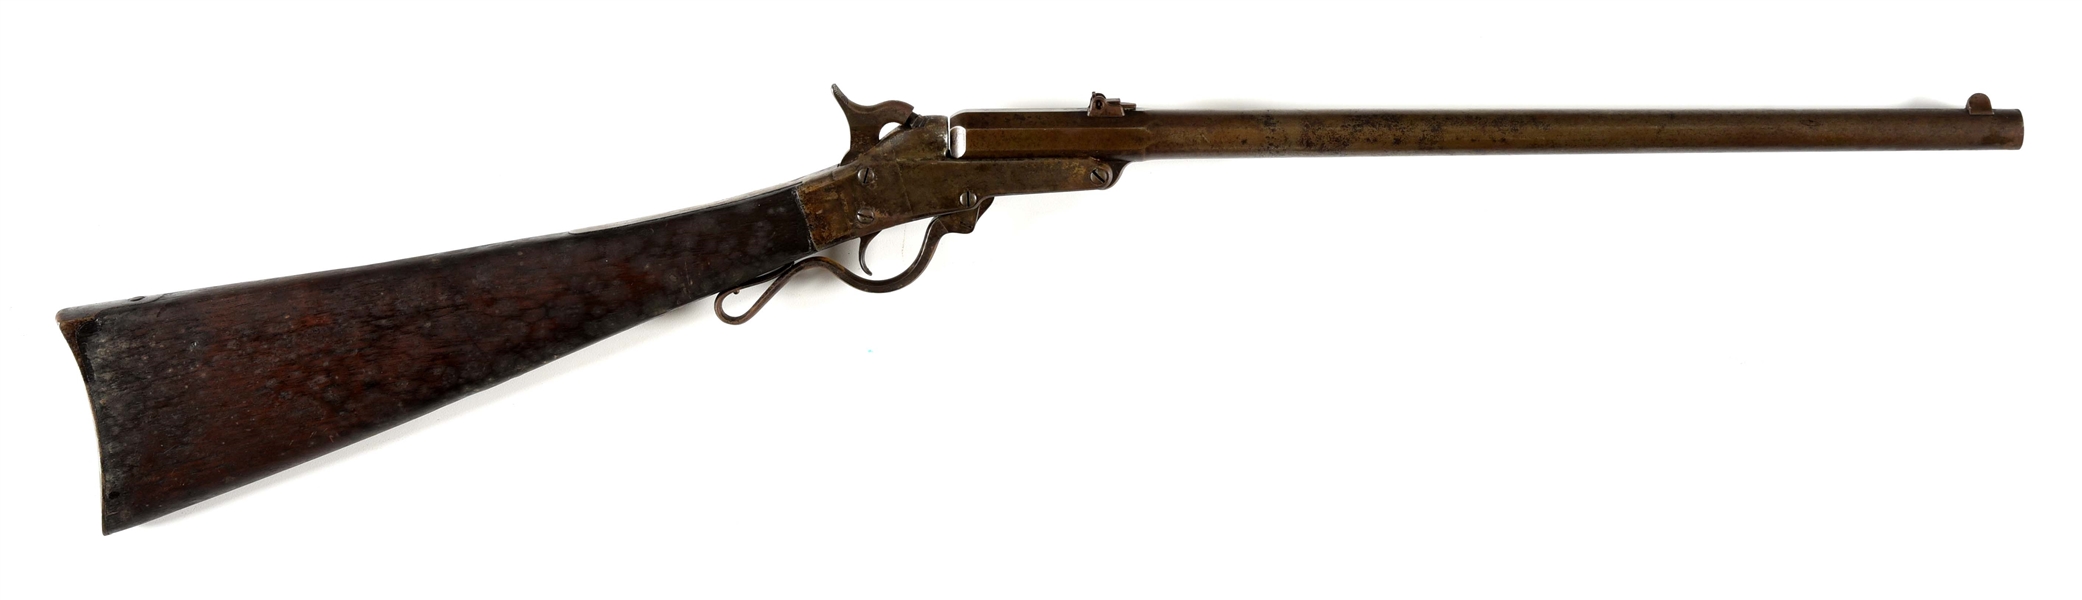 (A) 2ND MODEL MAYNARD CARBINE BY THE MASSACHUSETTS ARMS CO.